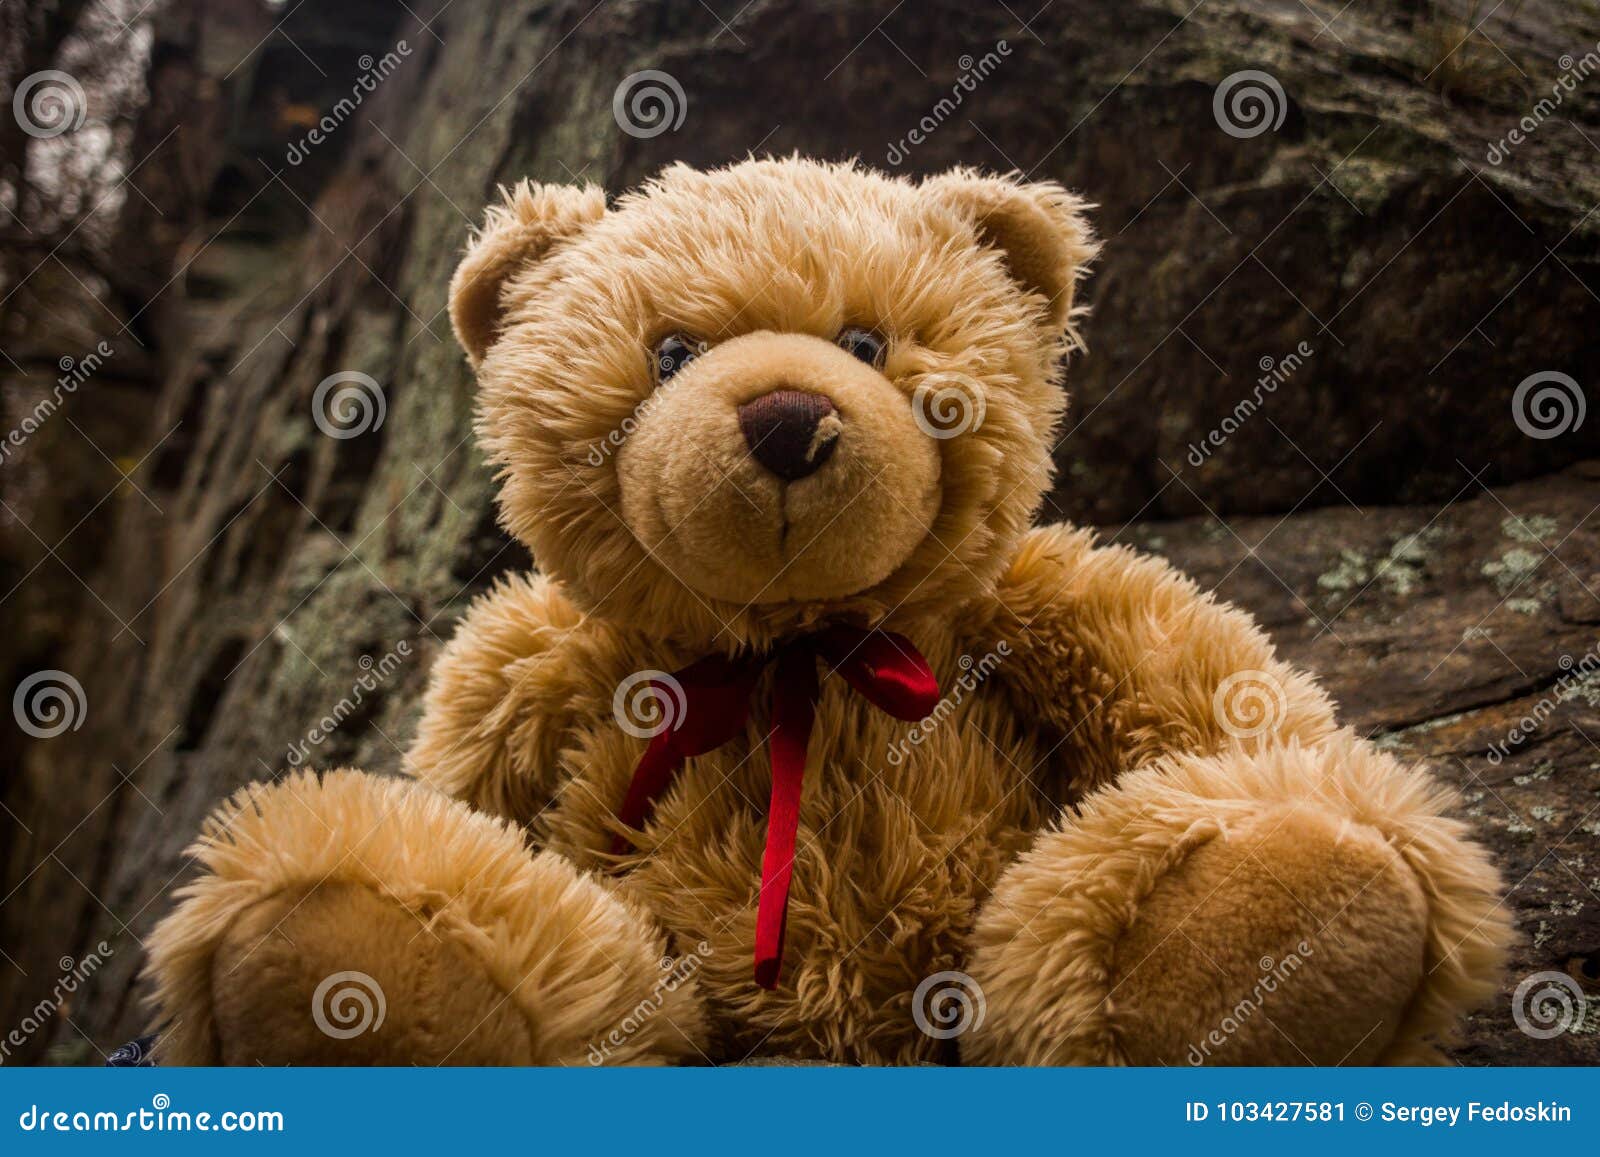 teddy bear names starting with s